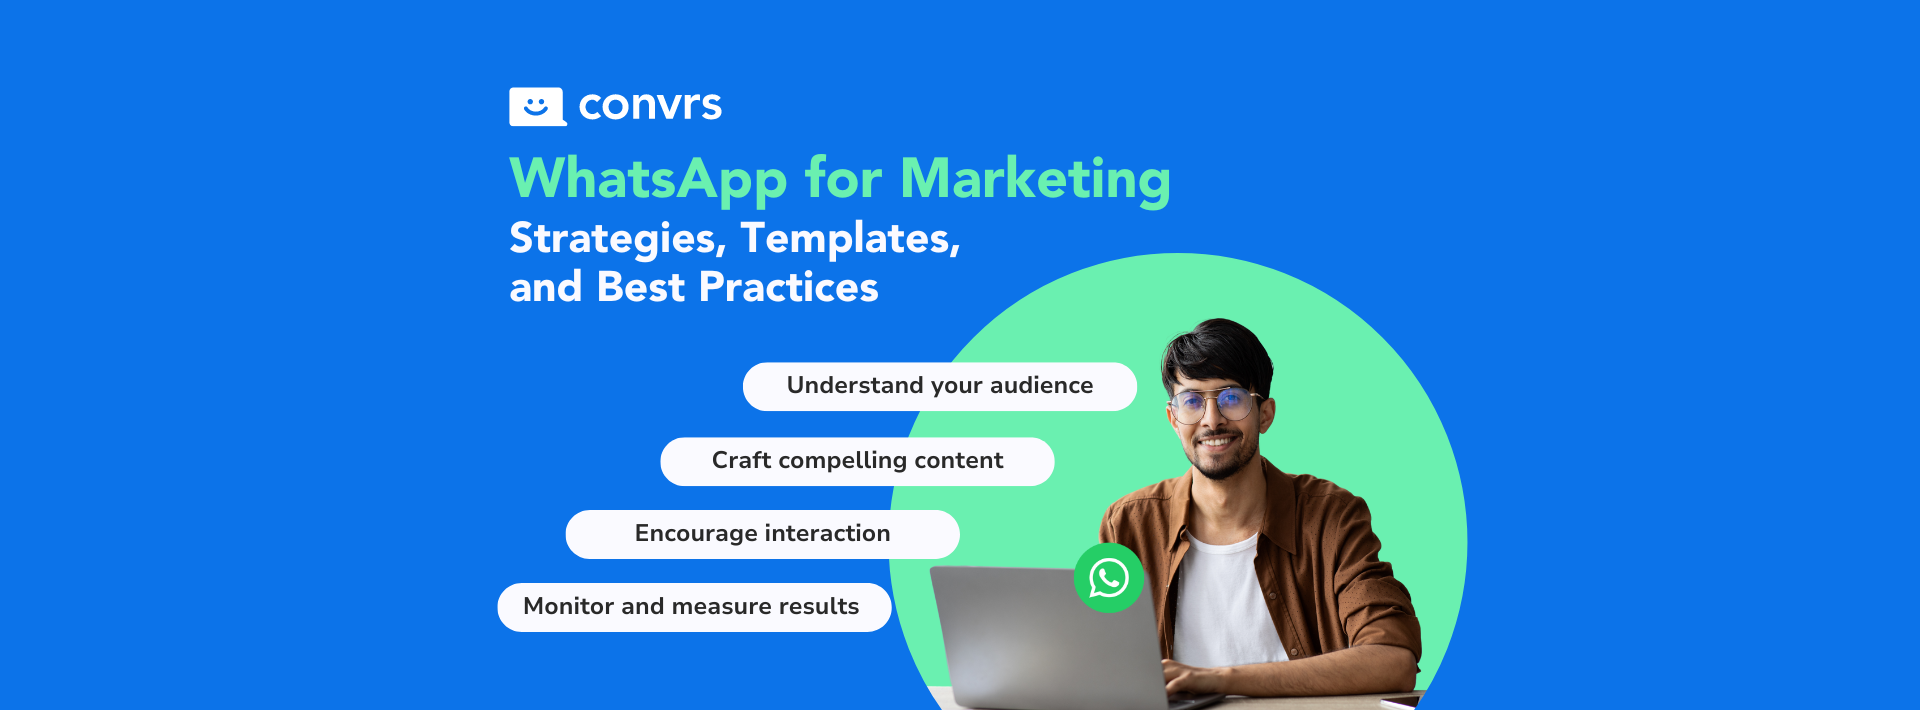 Marketer using WhatsApp for Marketing Campaigns